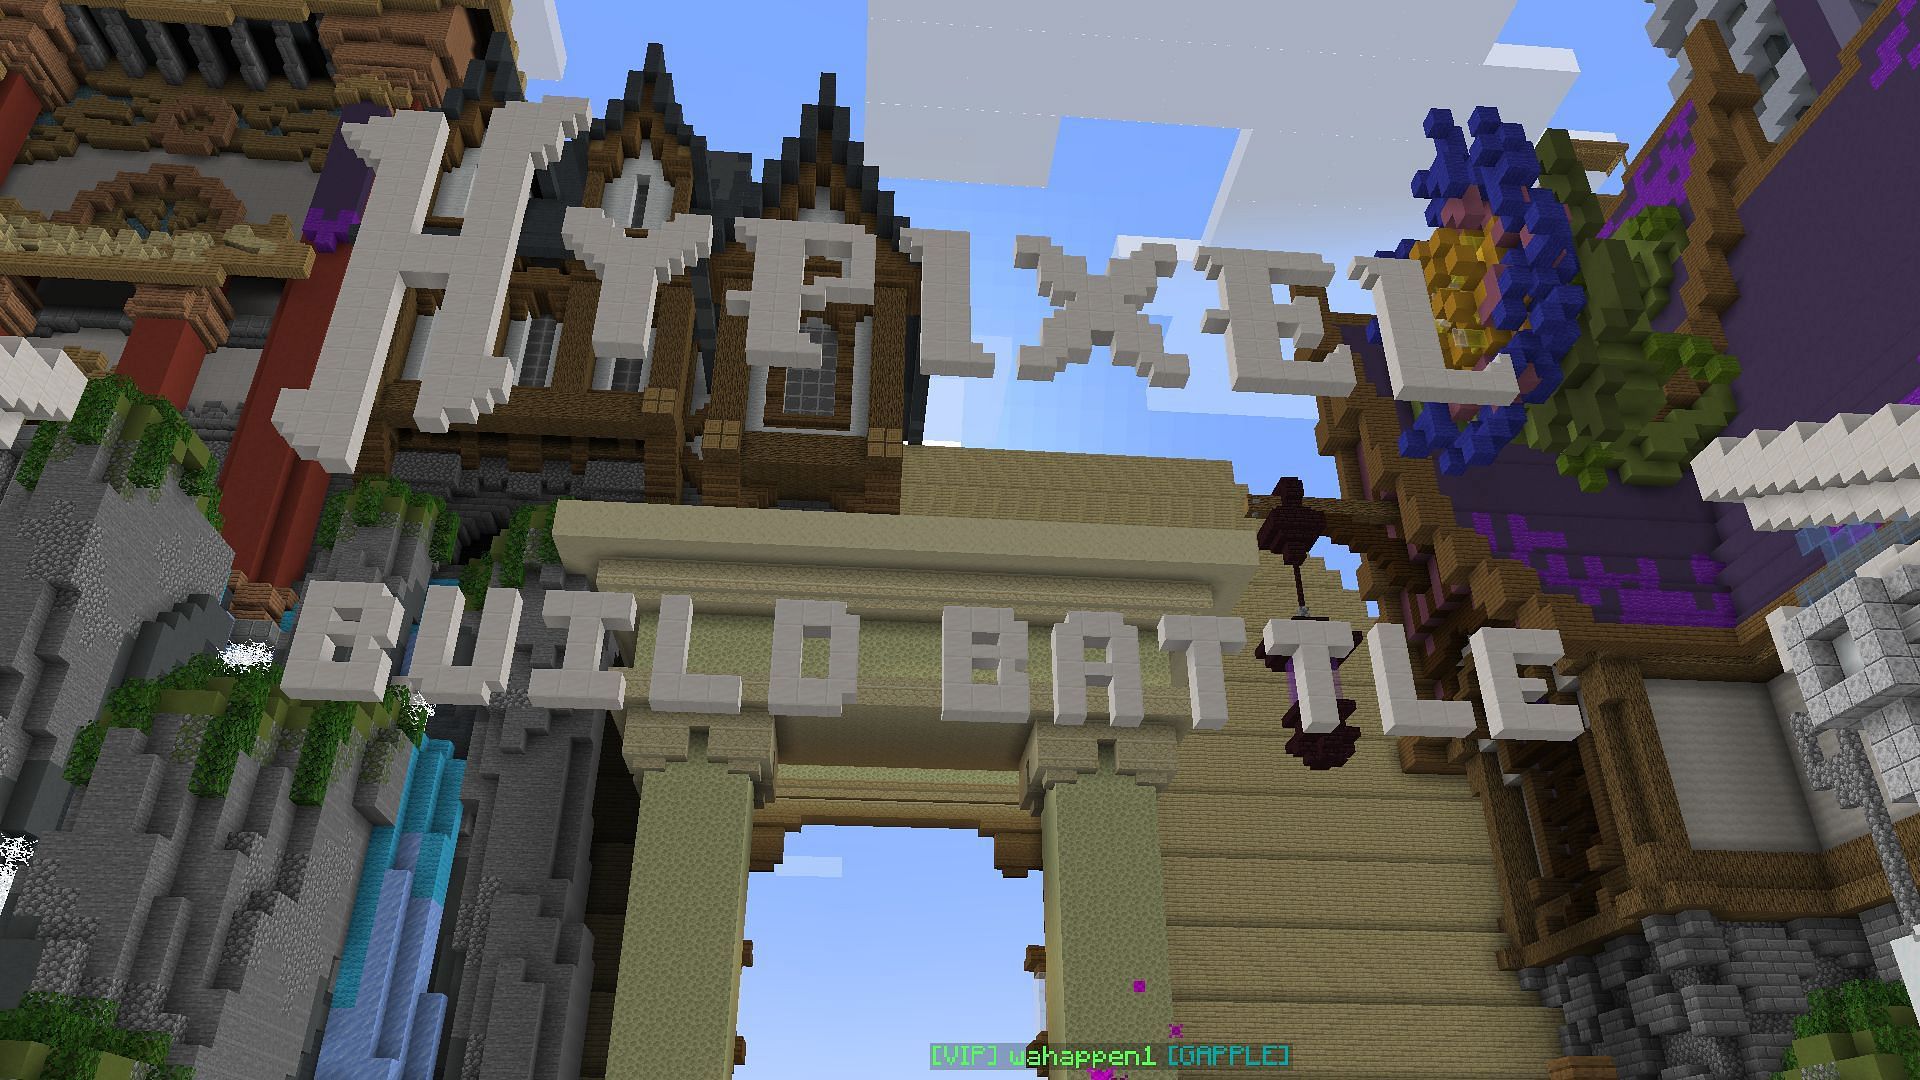 Build Battle hubs in the famous Hypixel Minecraft server (Image via Mojang)